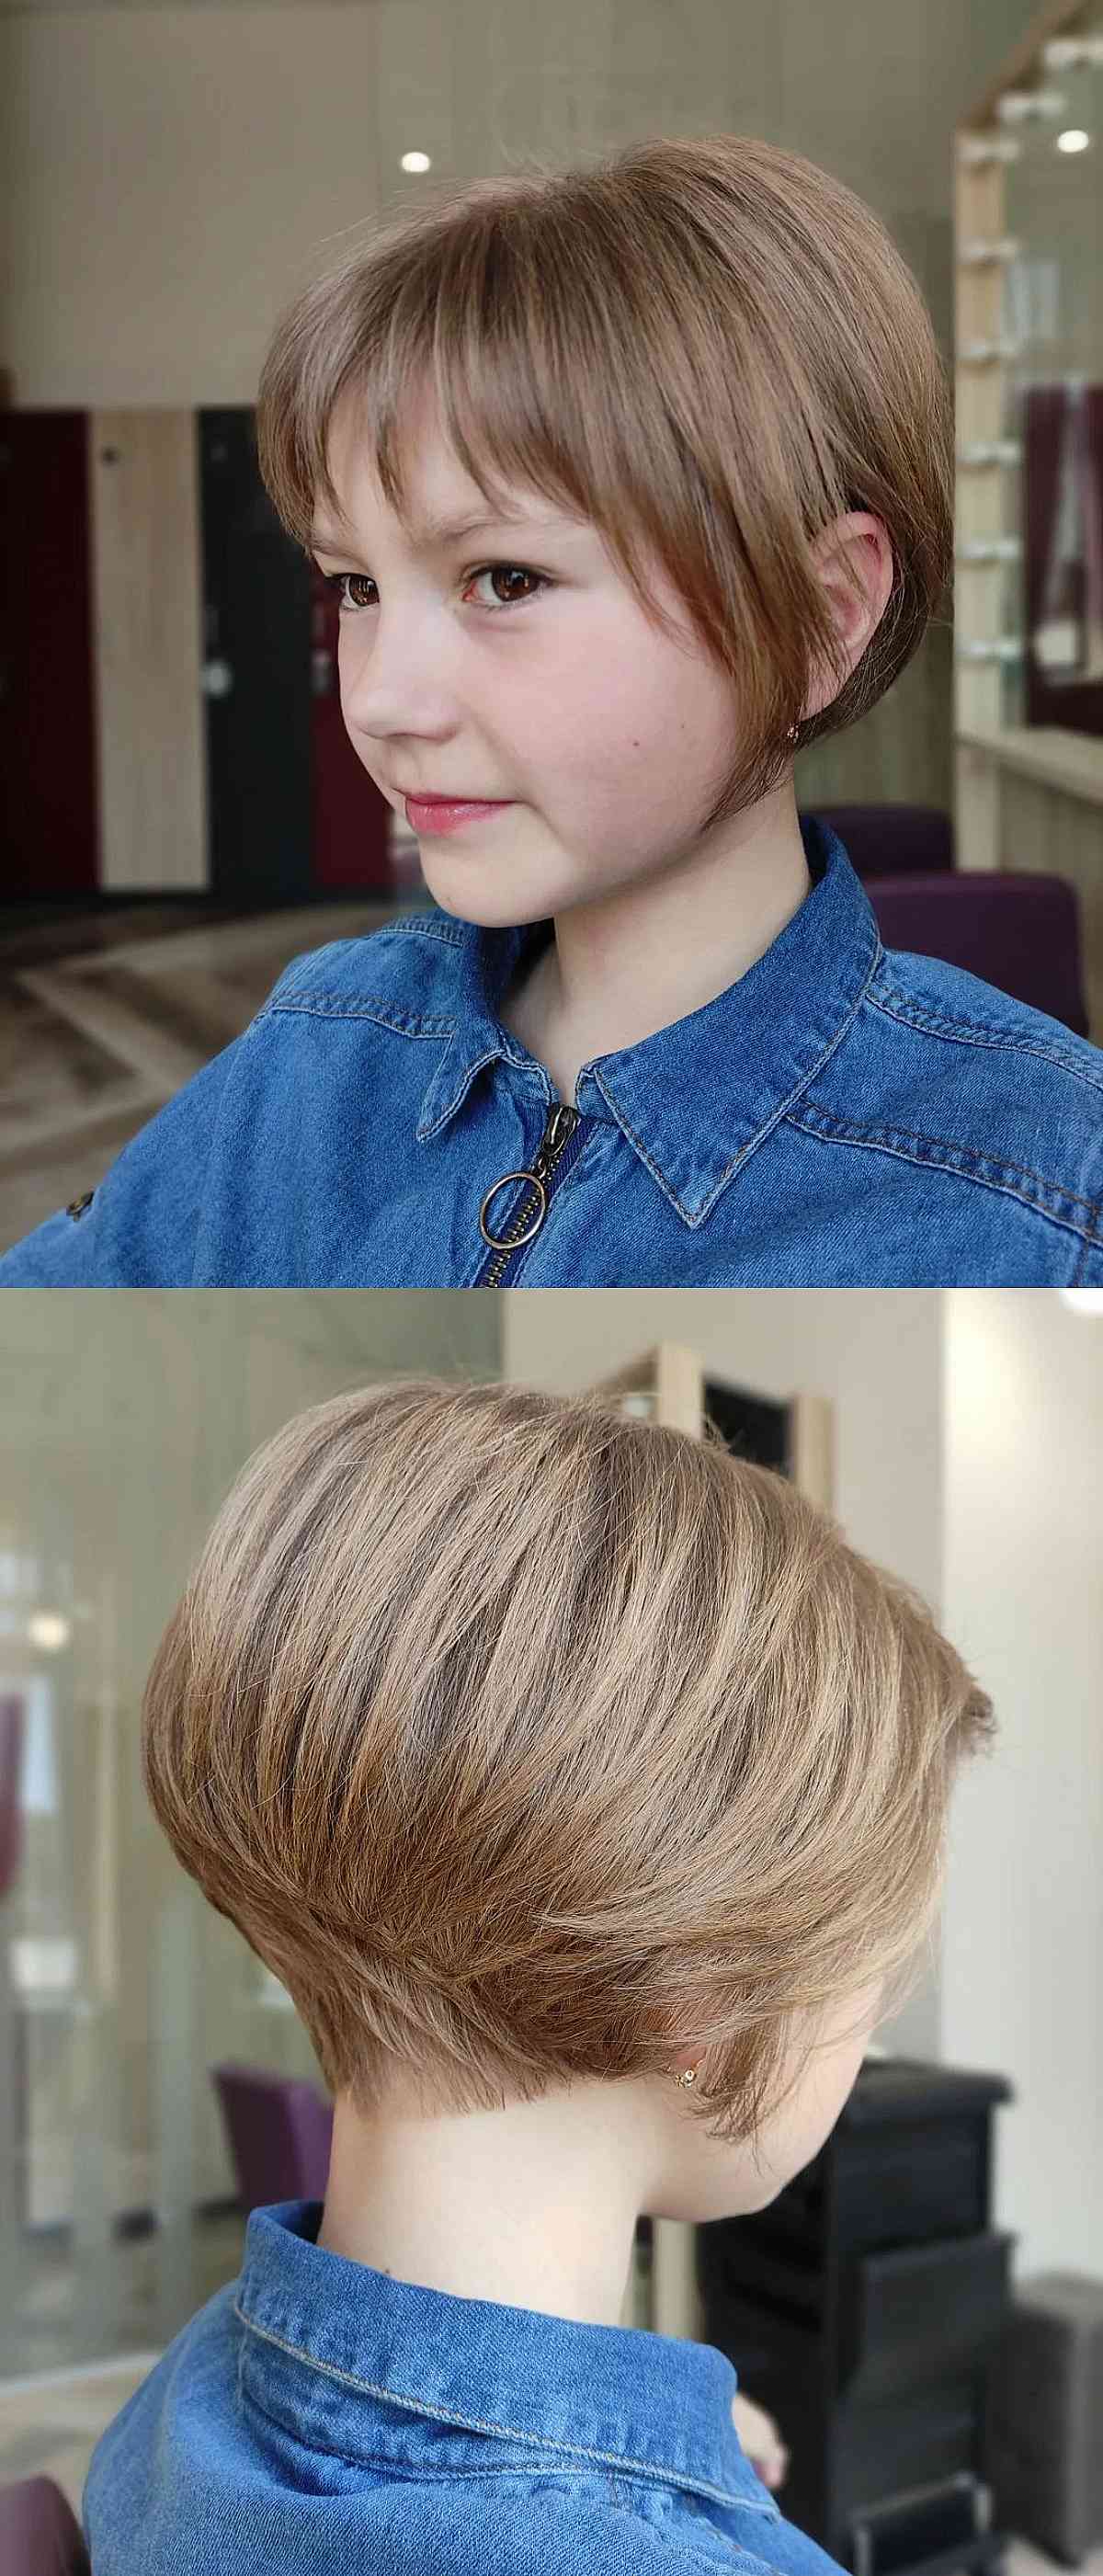 Top 10 Super Cute Hairstyles for Girls and Little Babies